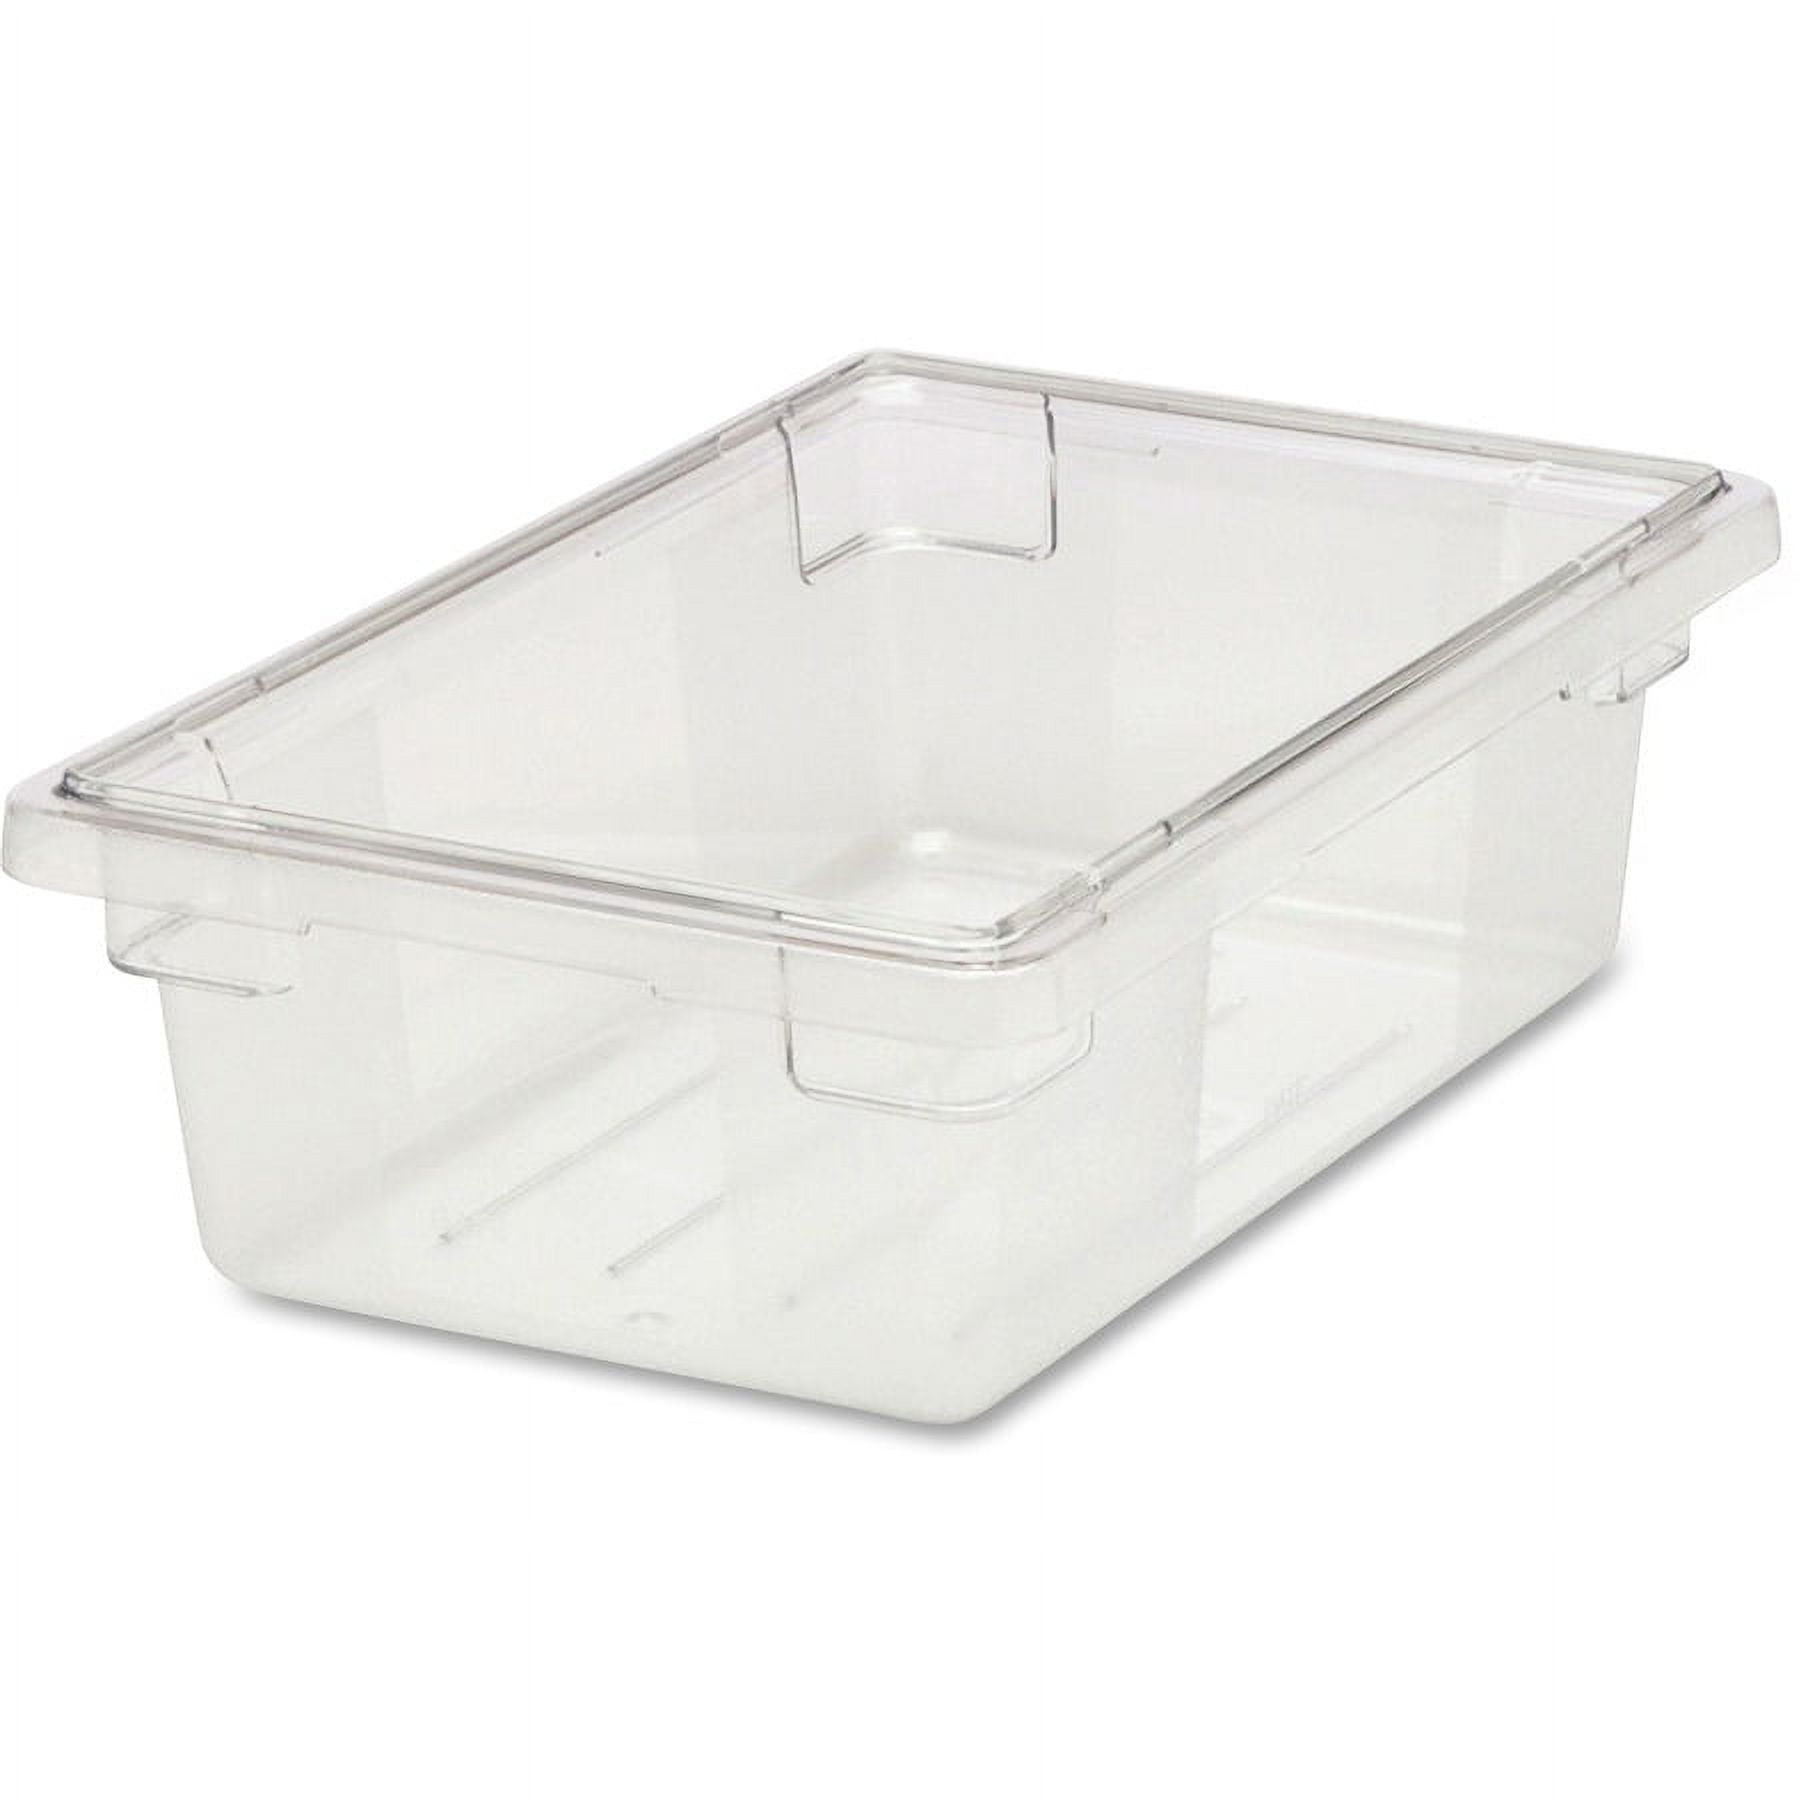 Rubbermaid® Commercial Step-On Container, Oval, Polyethy